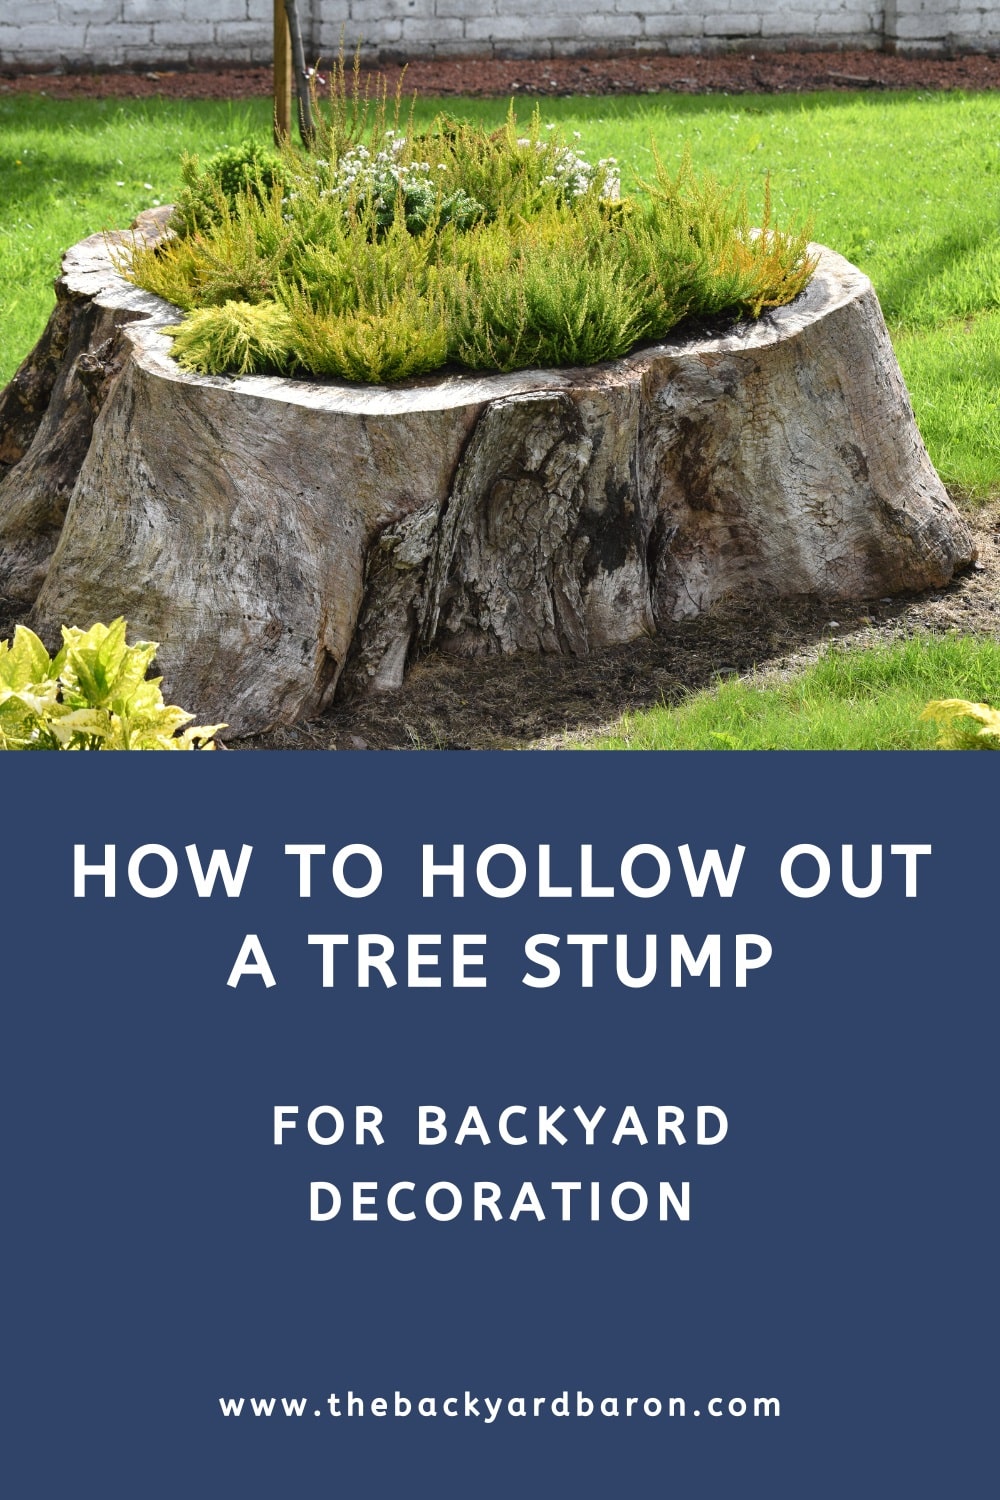 Guide to hollowing out a tree stump